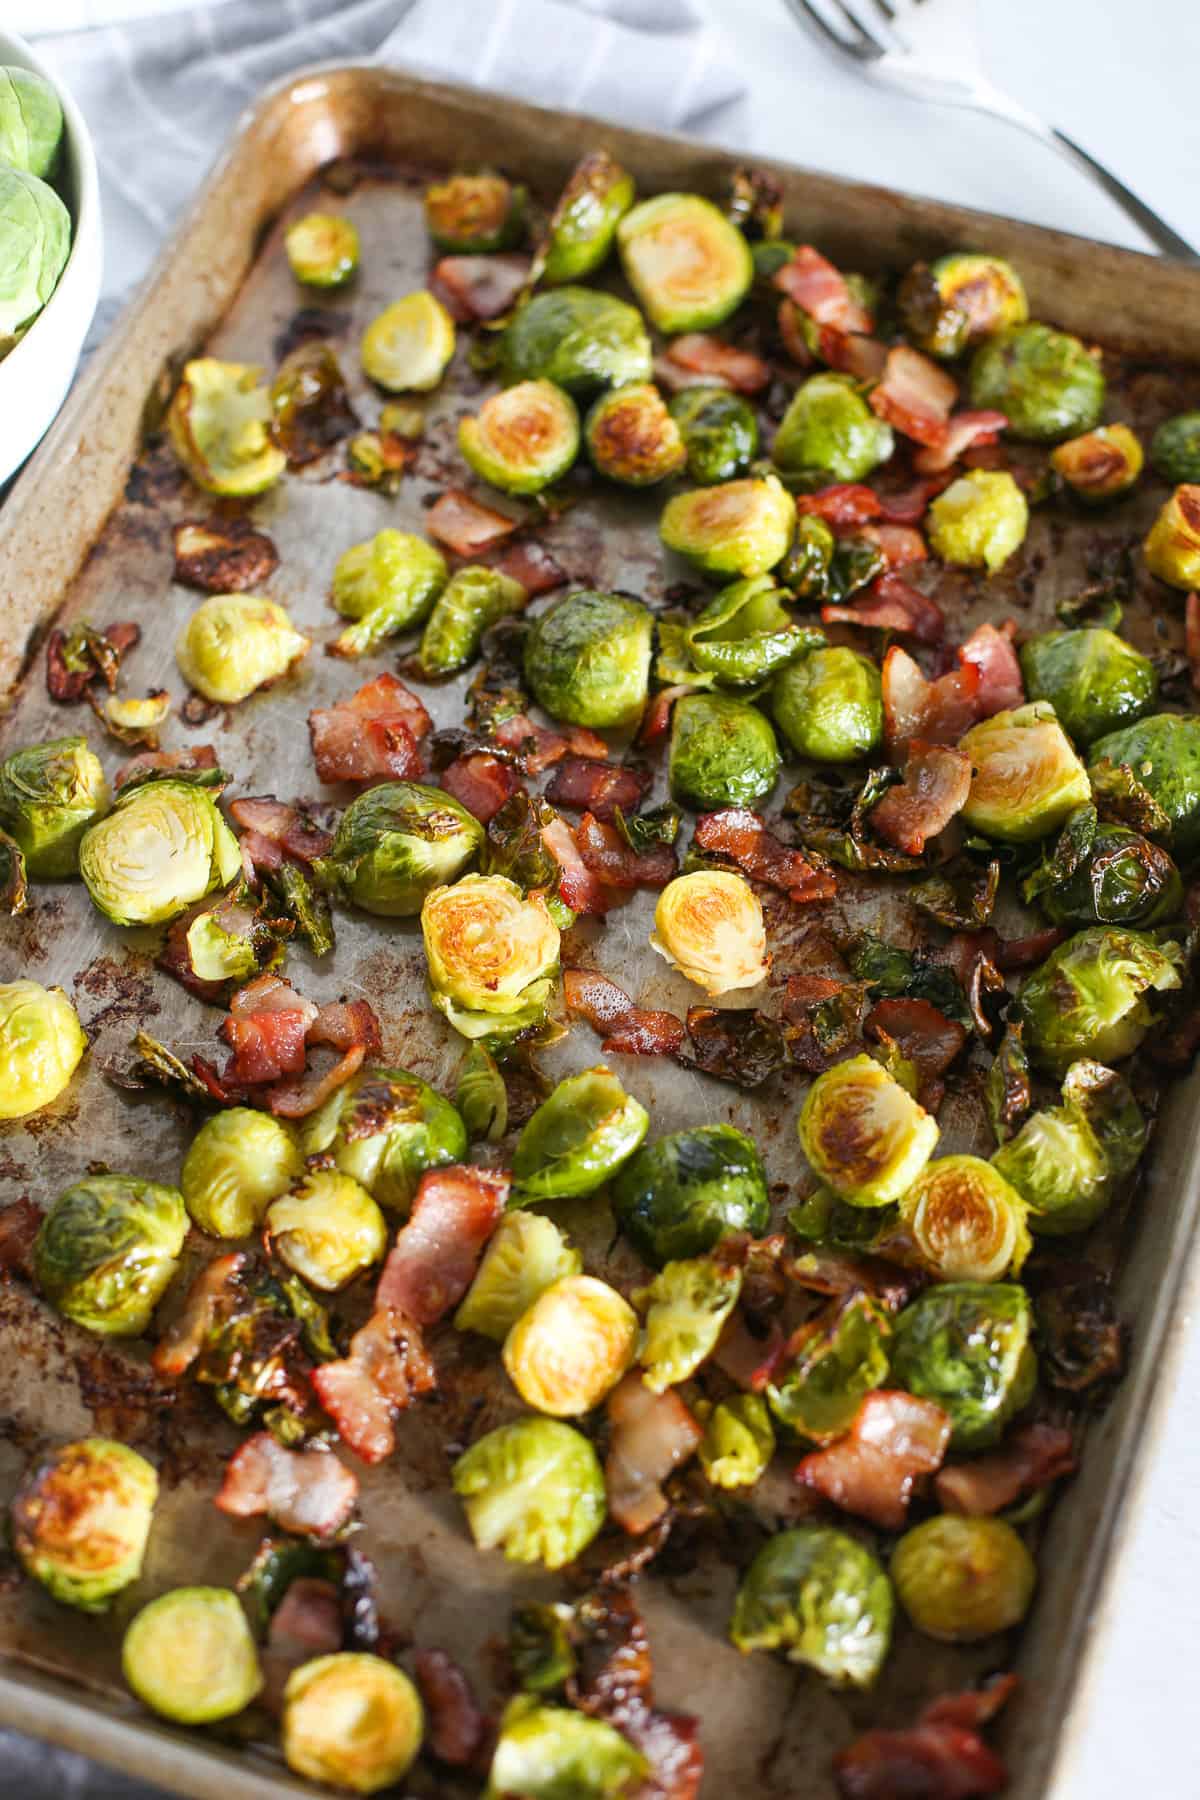 Roasted Brussels sprouts and bacon on a baking sheet.